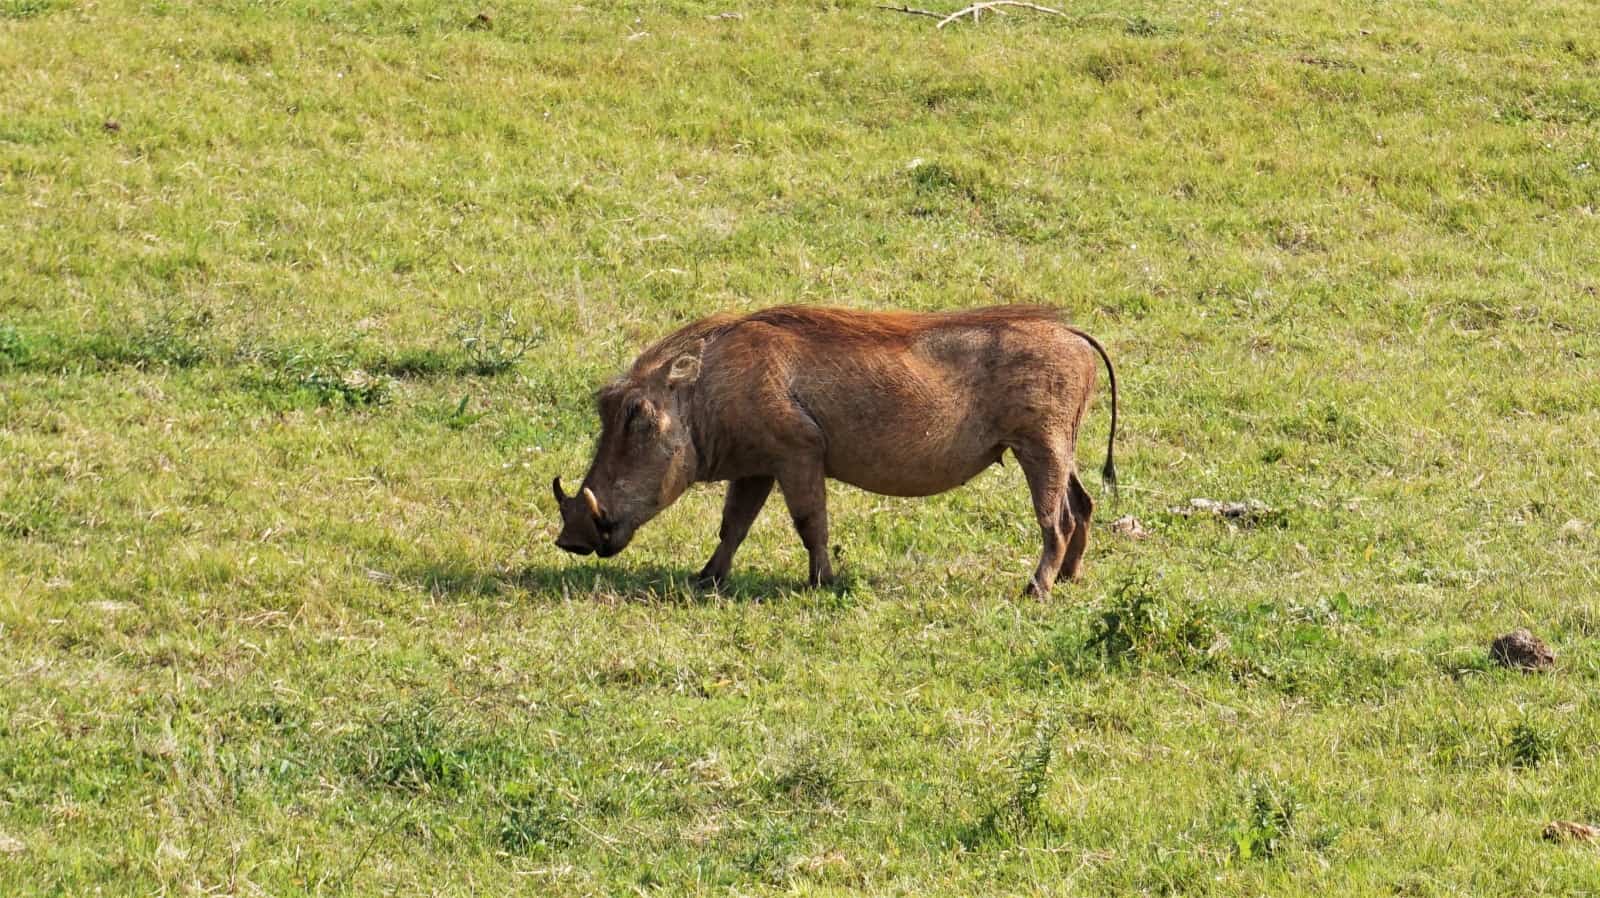 One of many warthogs we saw in Addo Elephant National Park